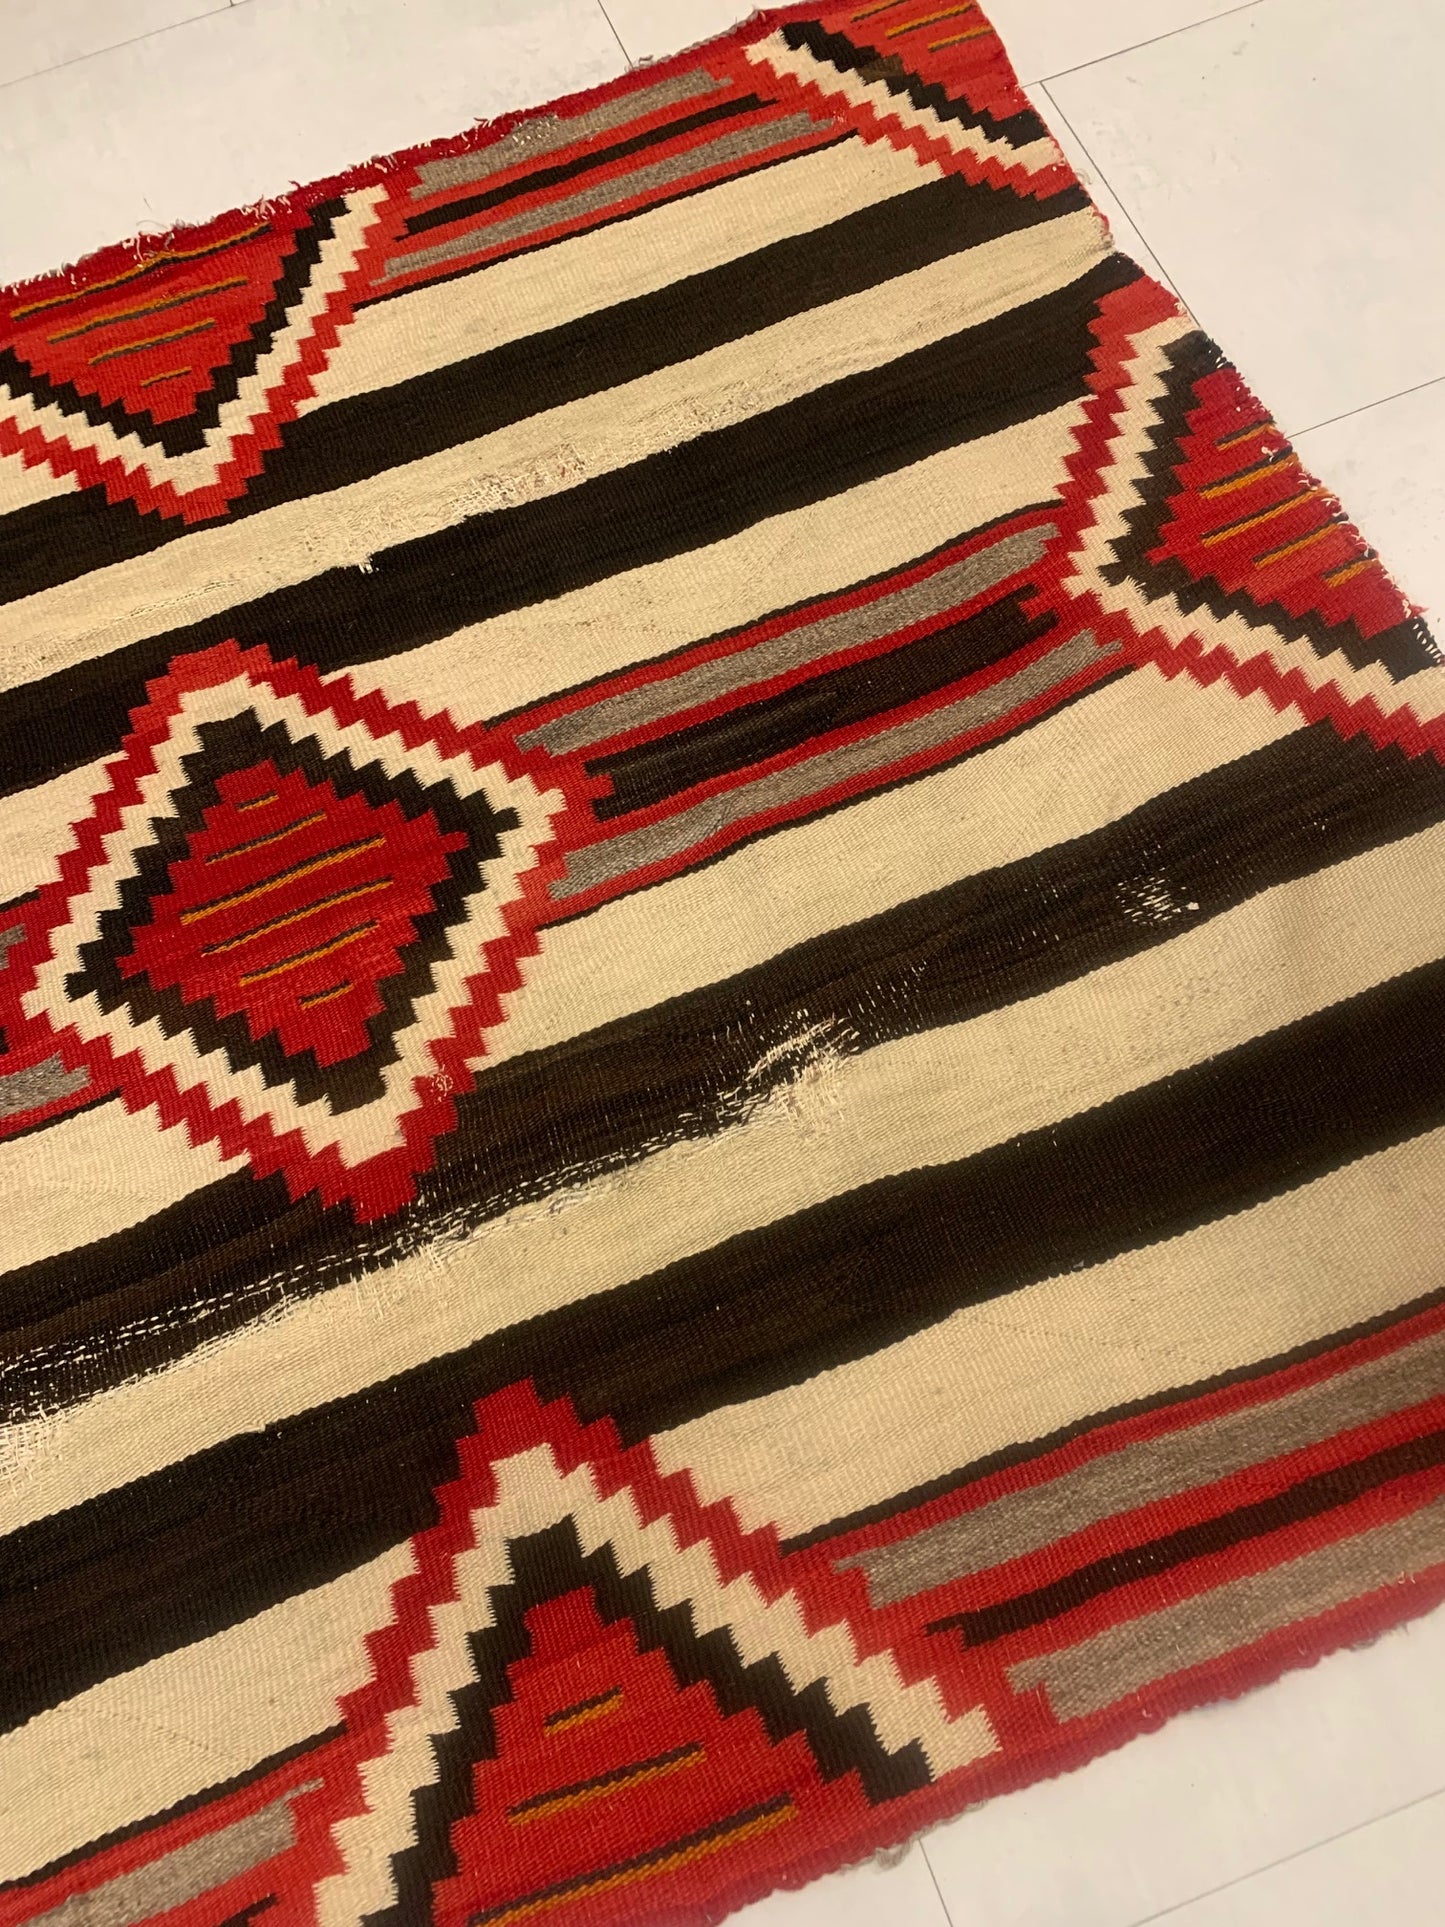 Bold Geometric Patterns including Stripes and Diamonds on Handcrafted American Navajo Rug - 1880s